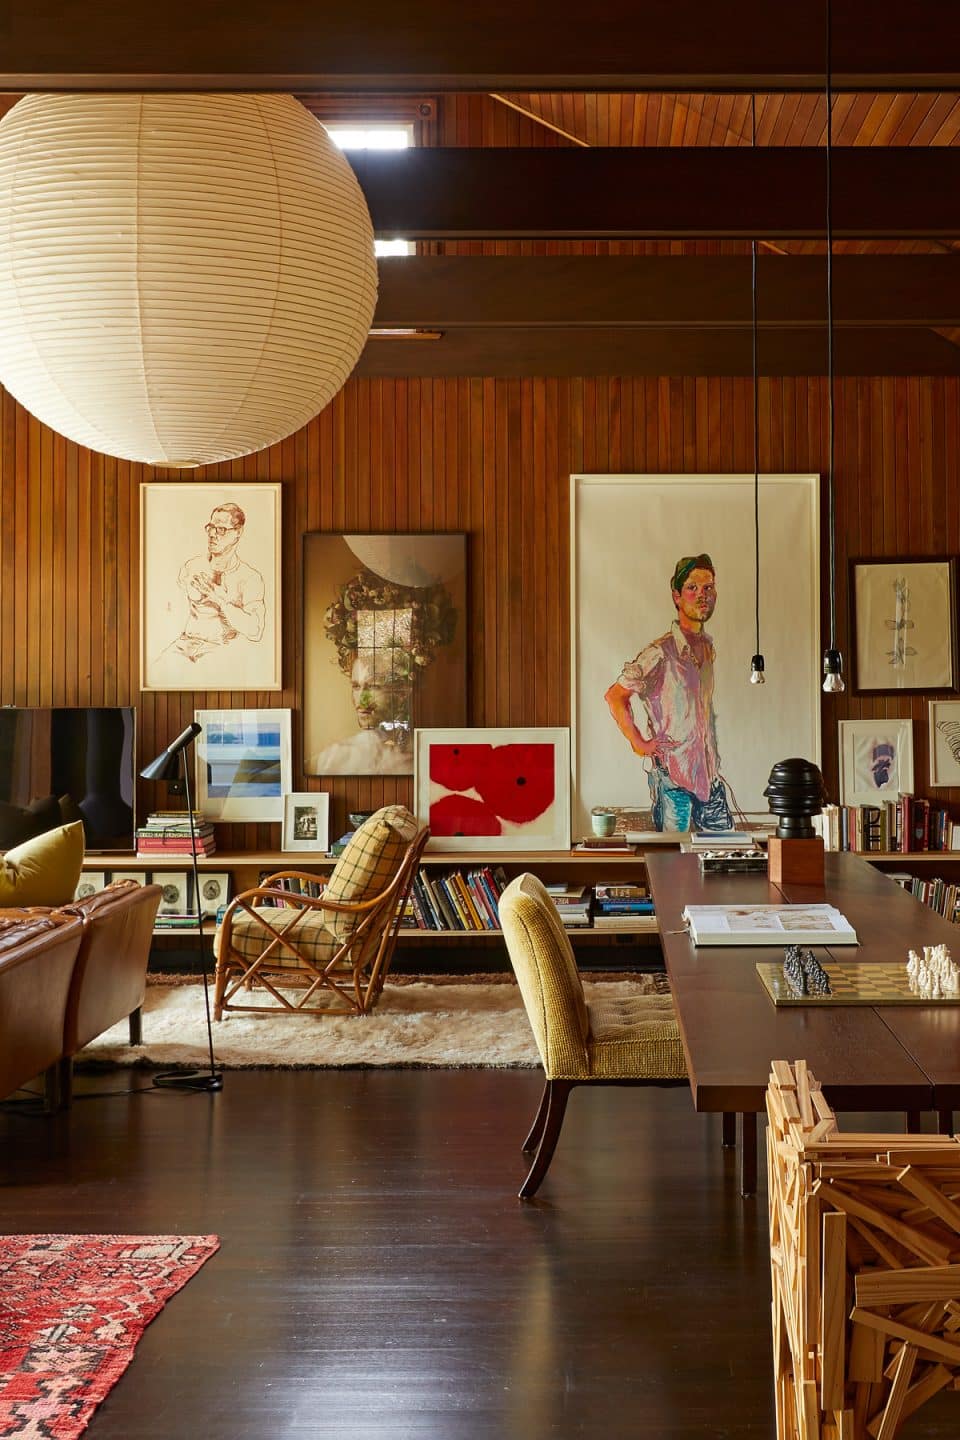 Designers Love Colin King’s Approach to Styling Spaces, and Here’s Why